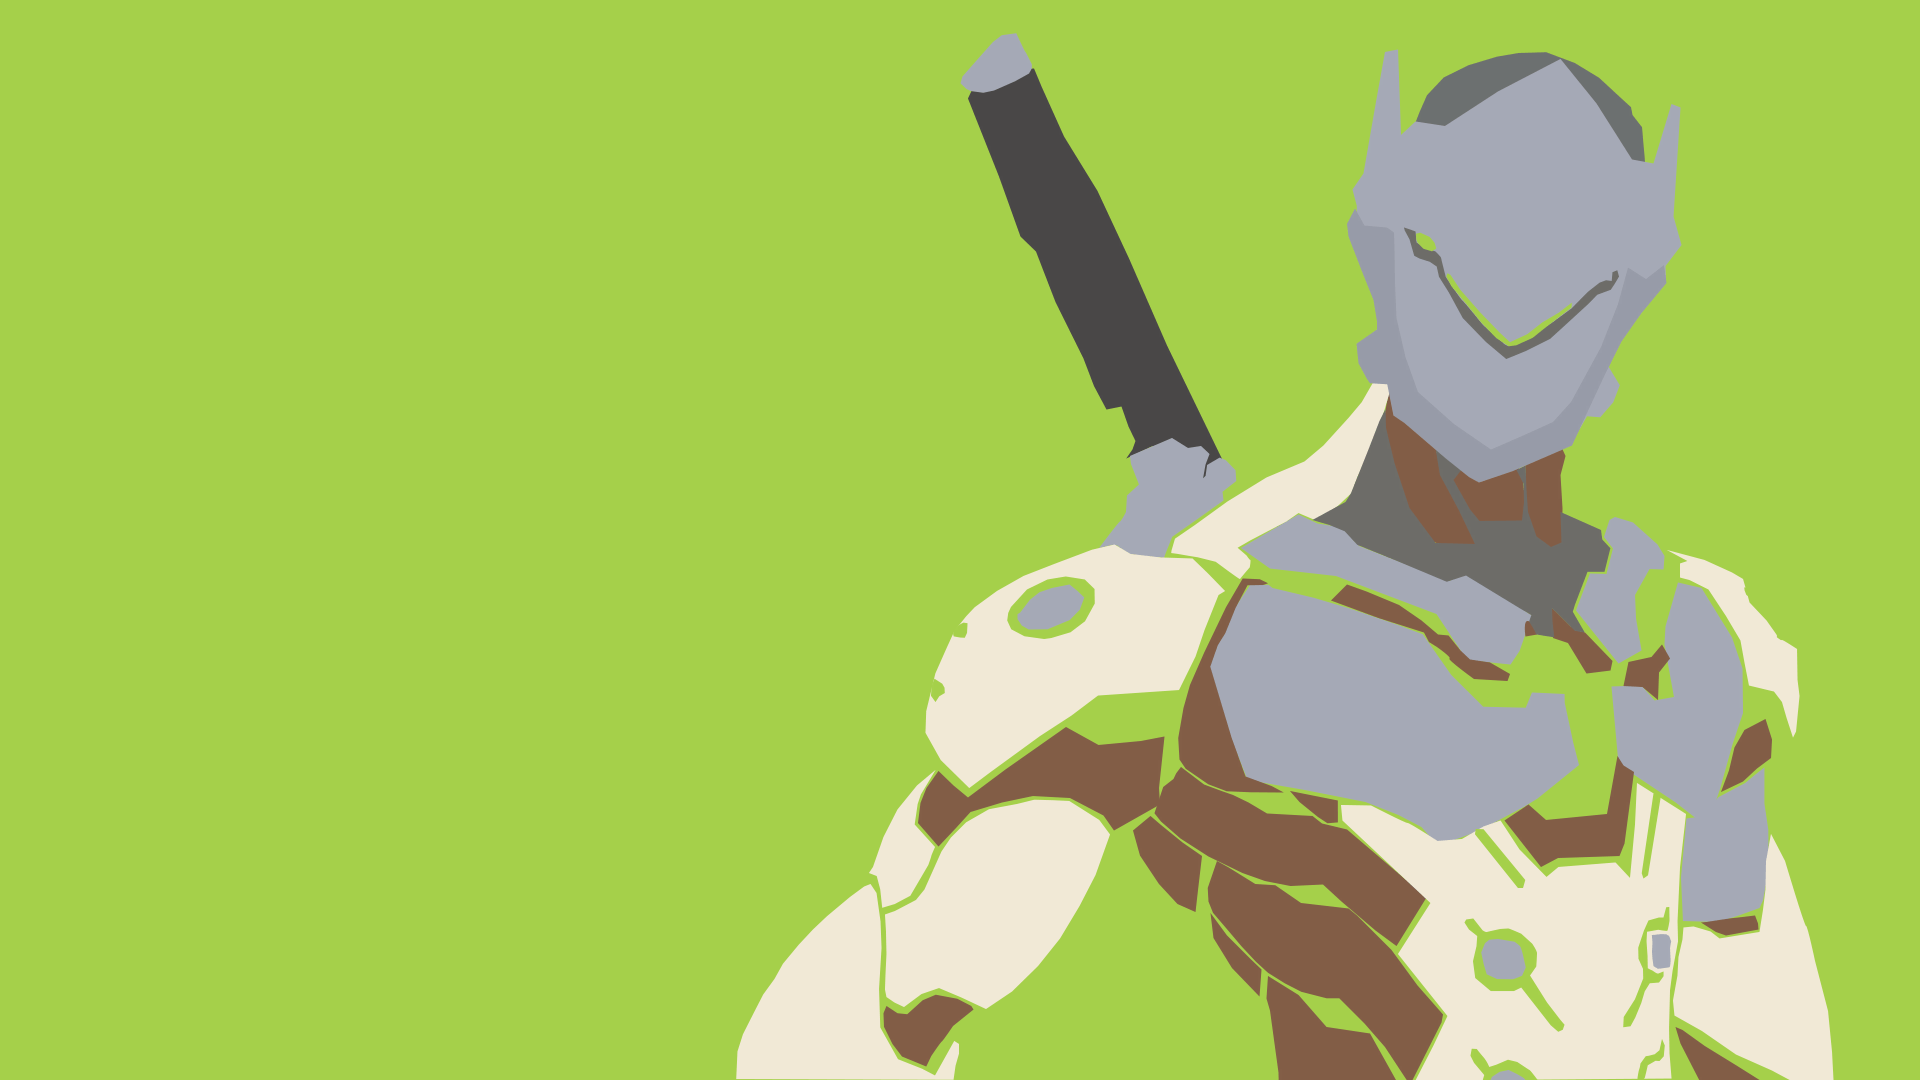 I'm super excited for Overwatch, so I tried to make this minimalist